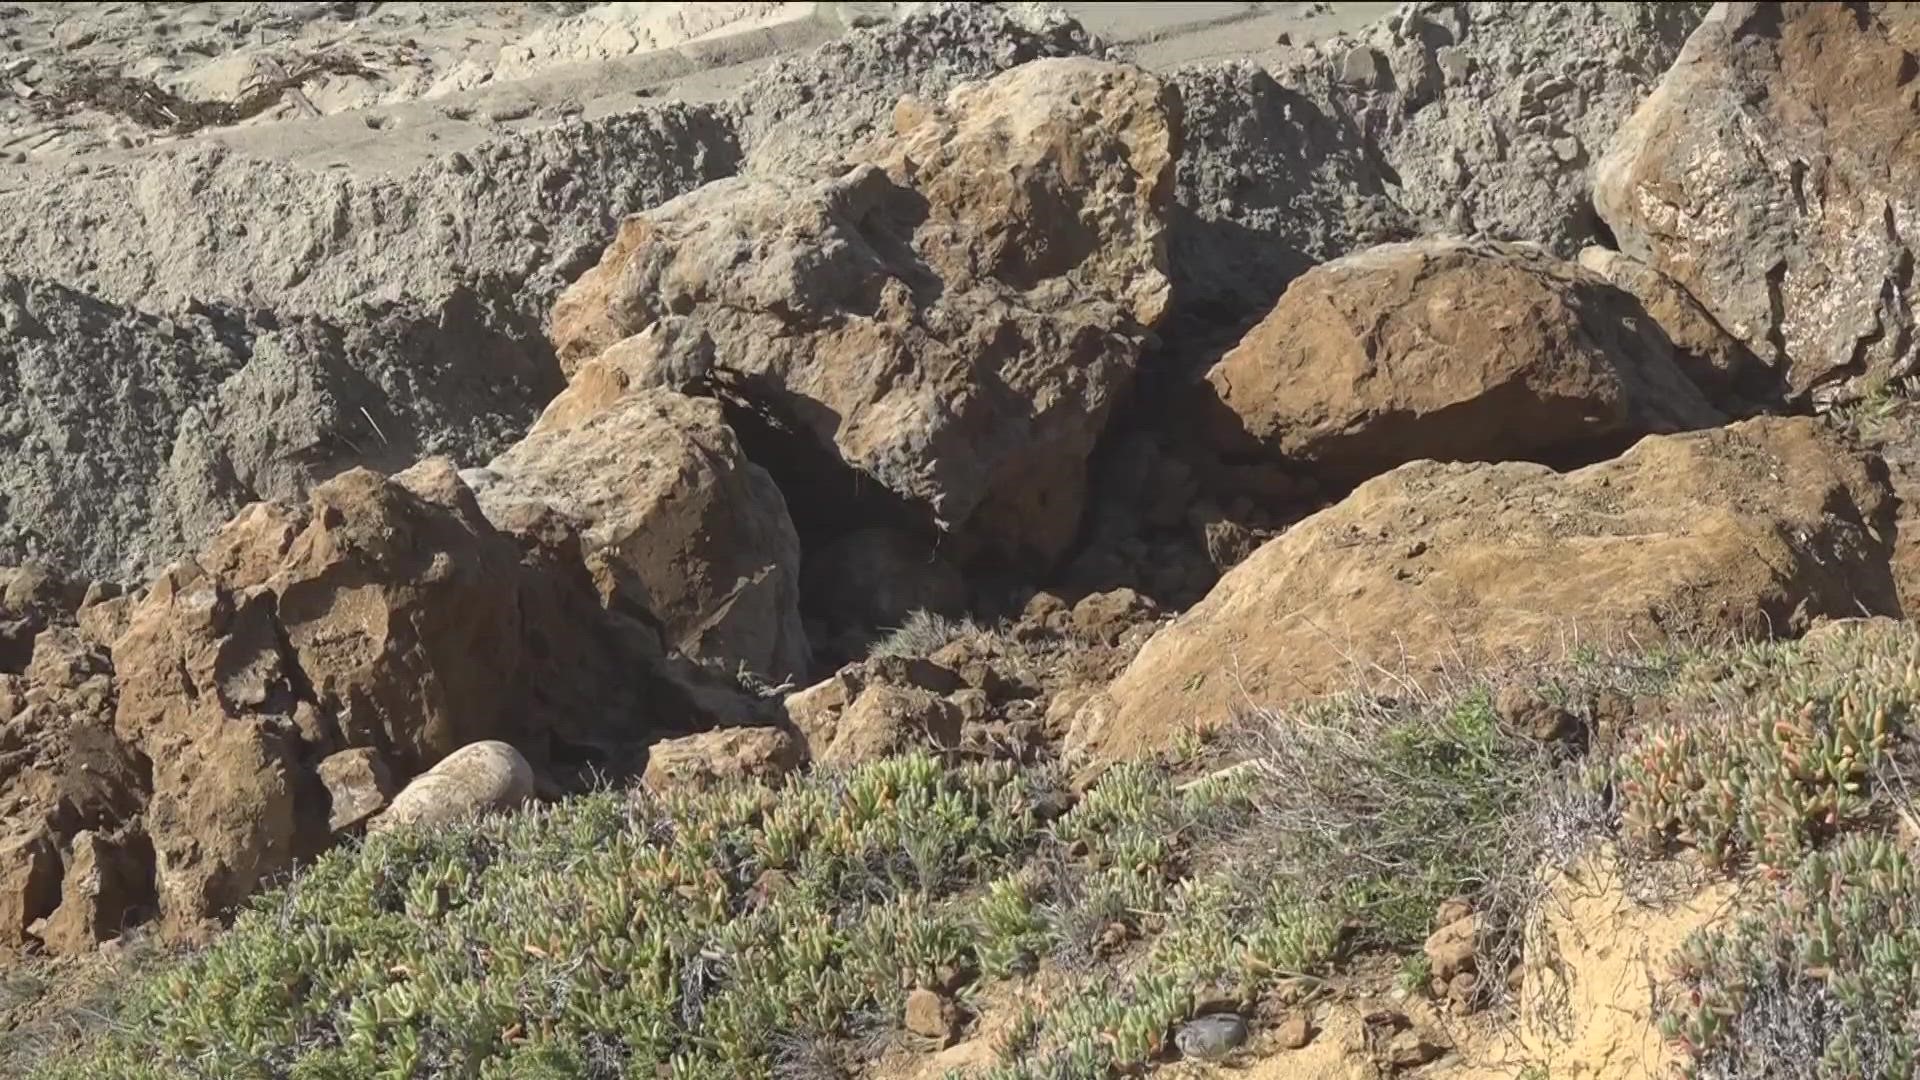 CBS 8 is working for your safety with an important warning about the cliffs in Pacific Beach.